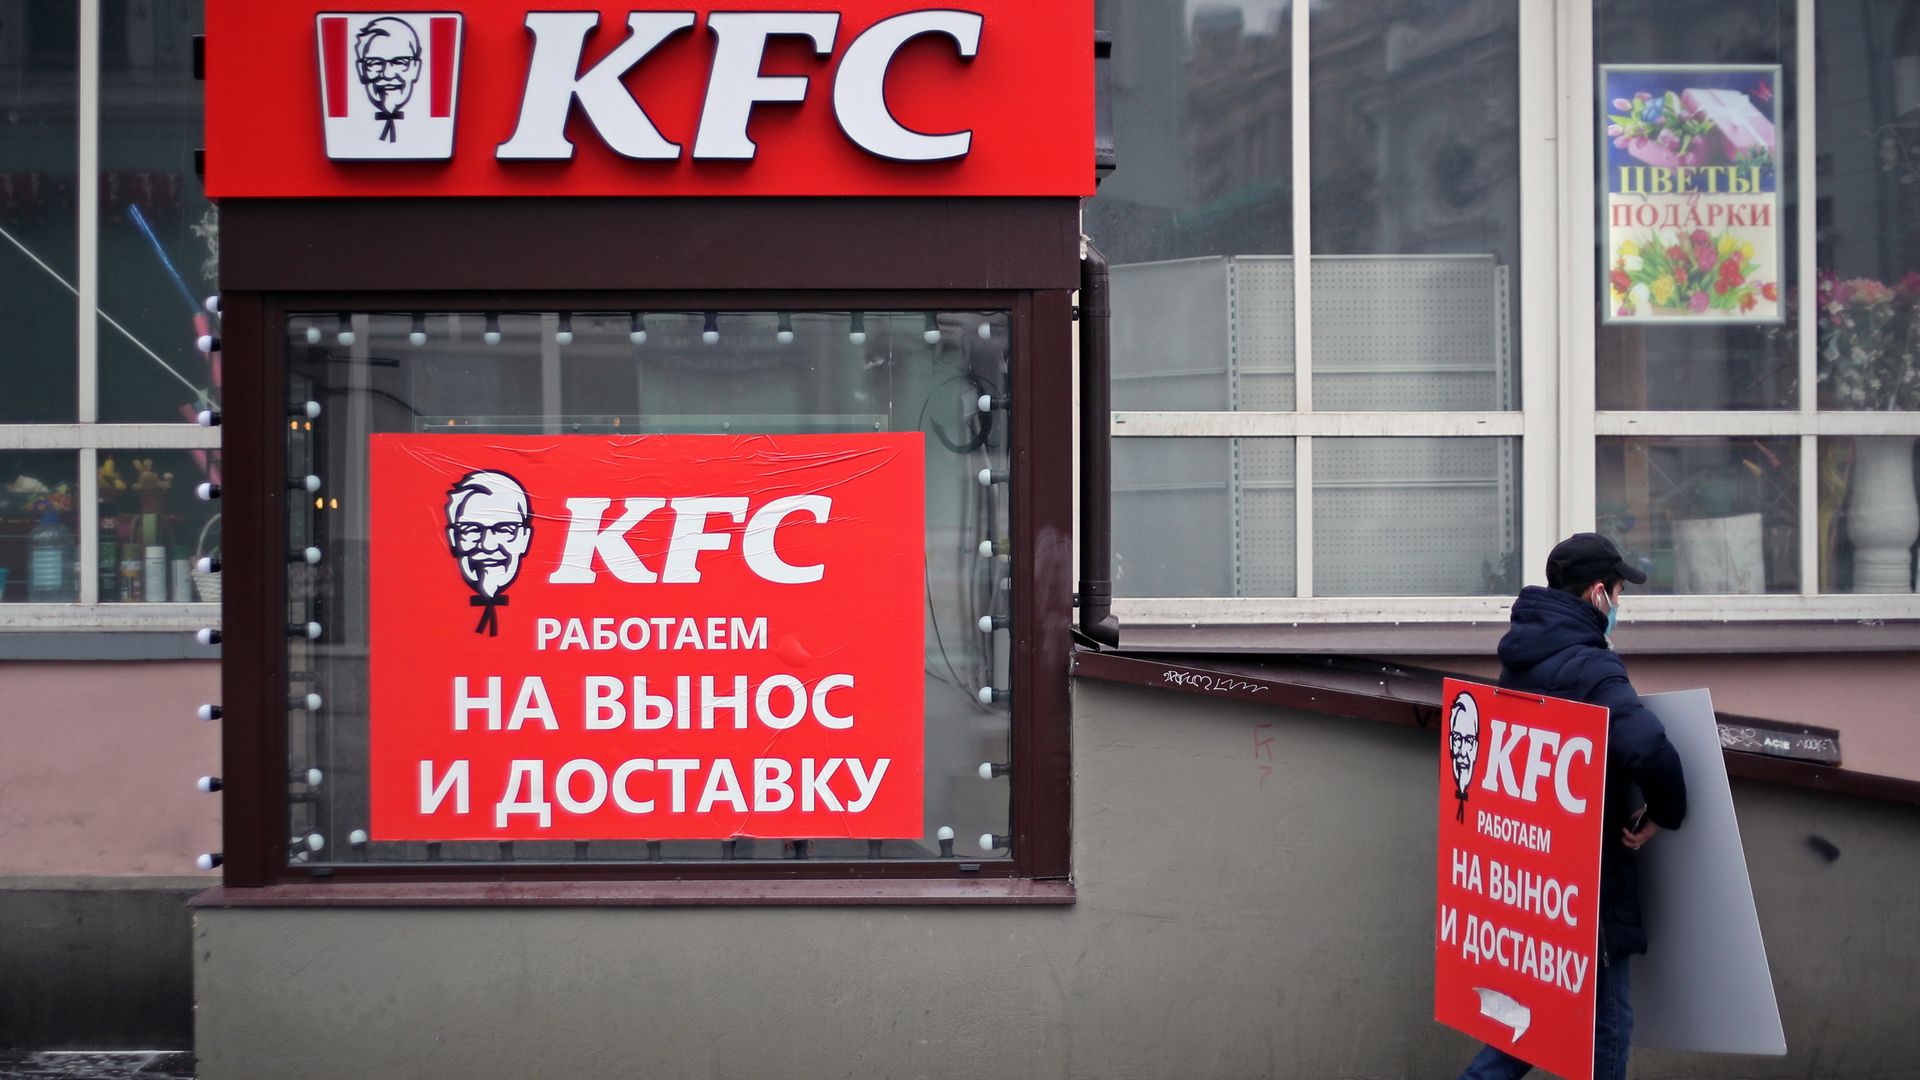 A sign walker outside a KFC fast food restaurant in Moscow, Russia, in 2020.